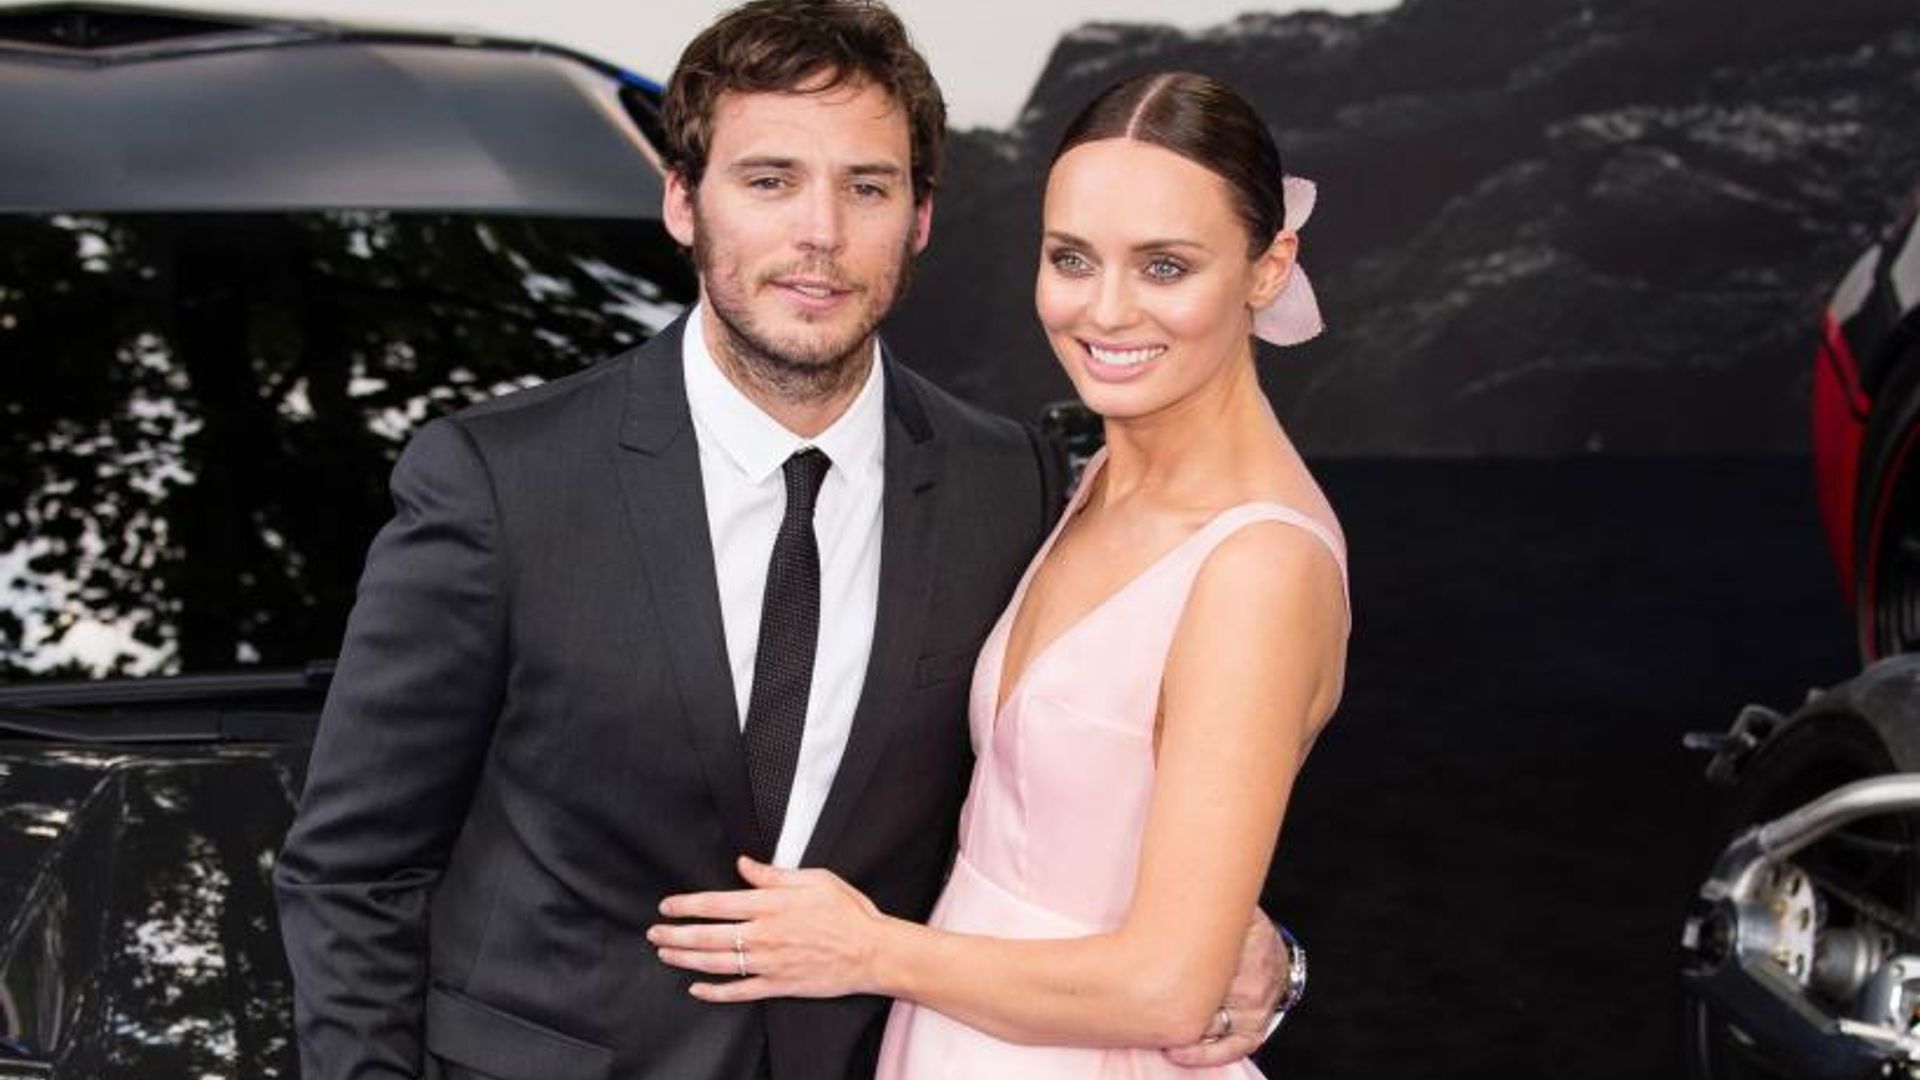 sam-claflin-at-transformers-premiere-with-wife-laura-haddock